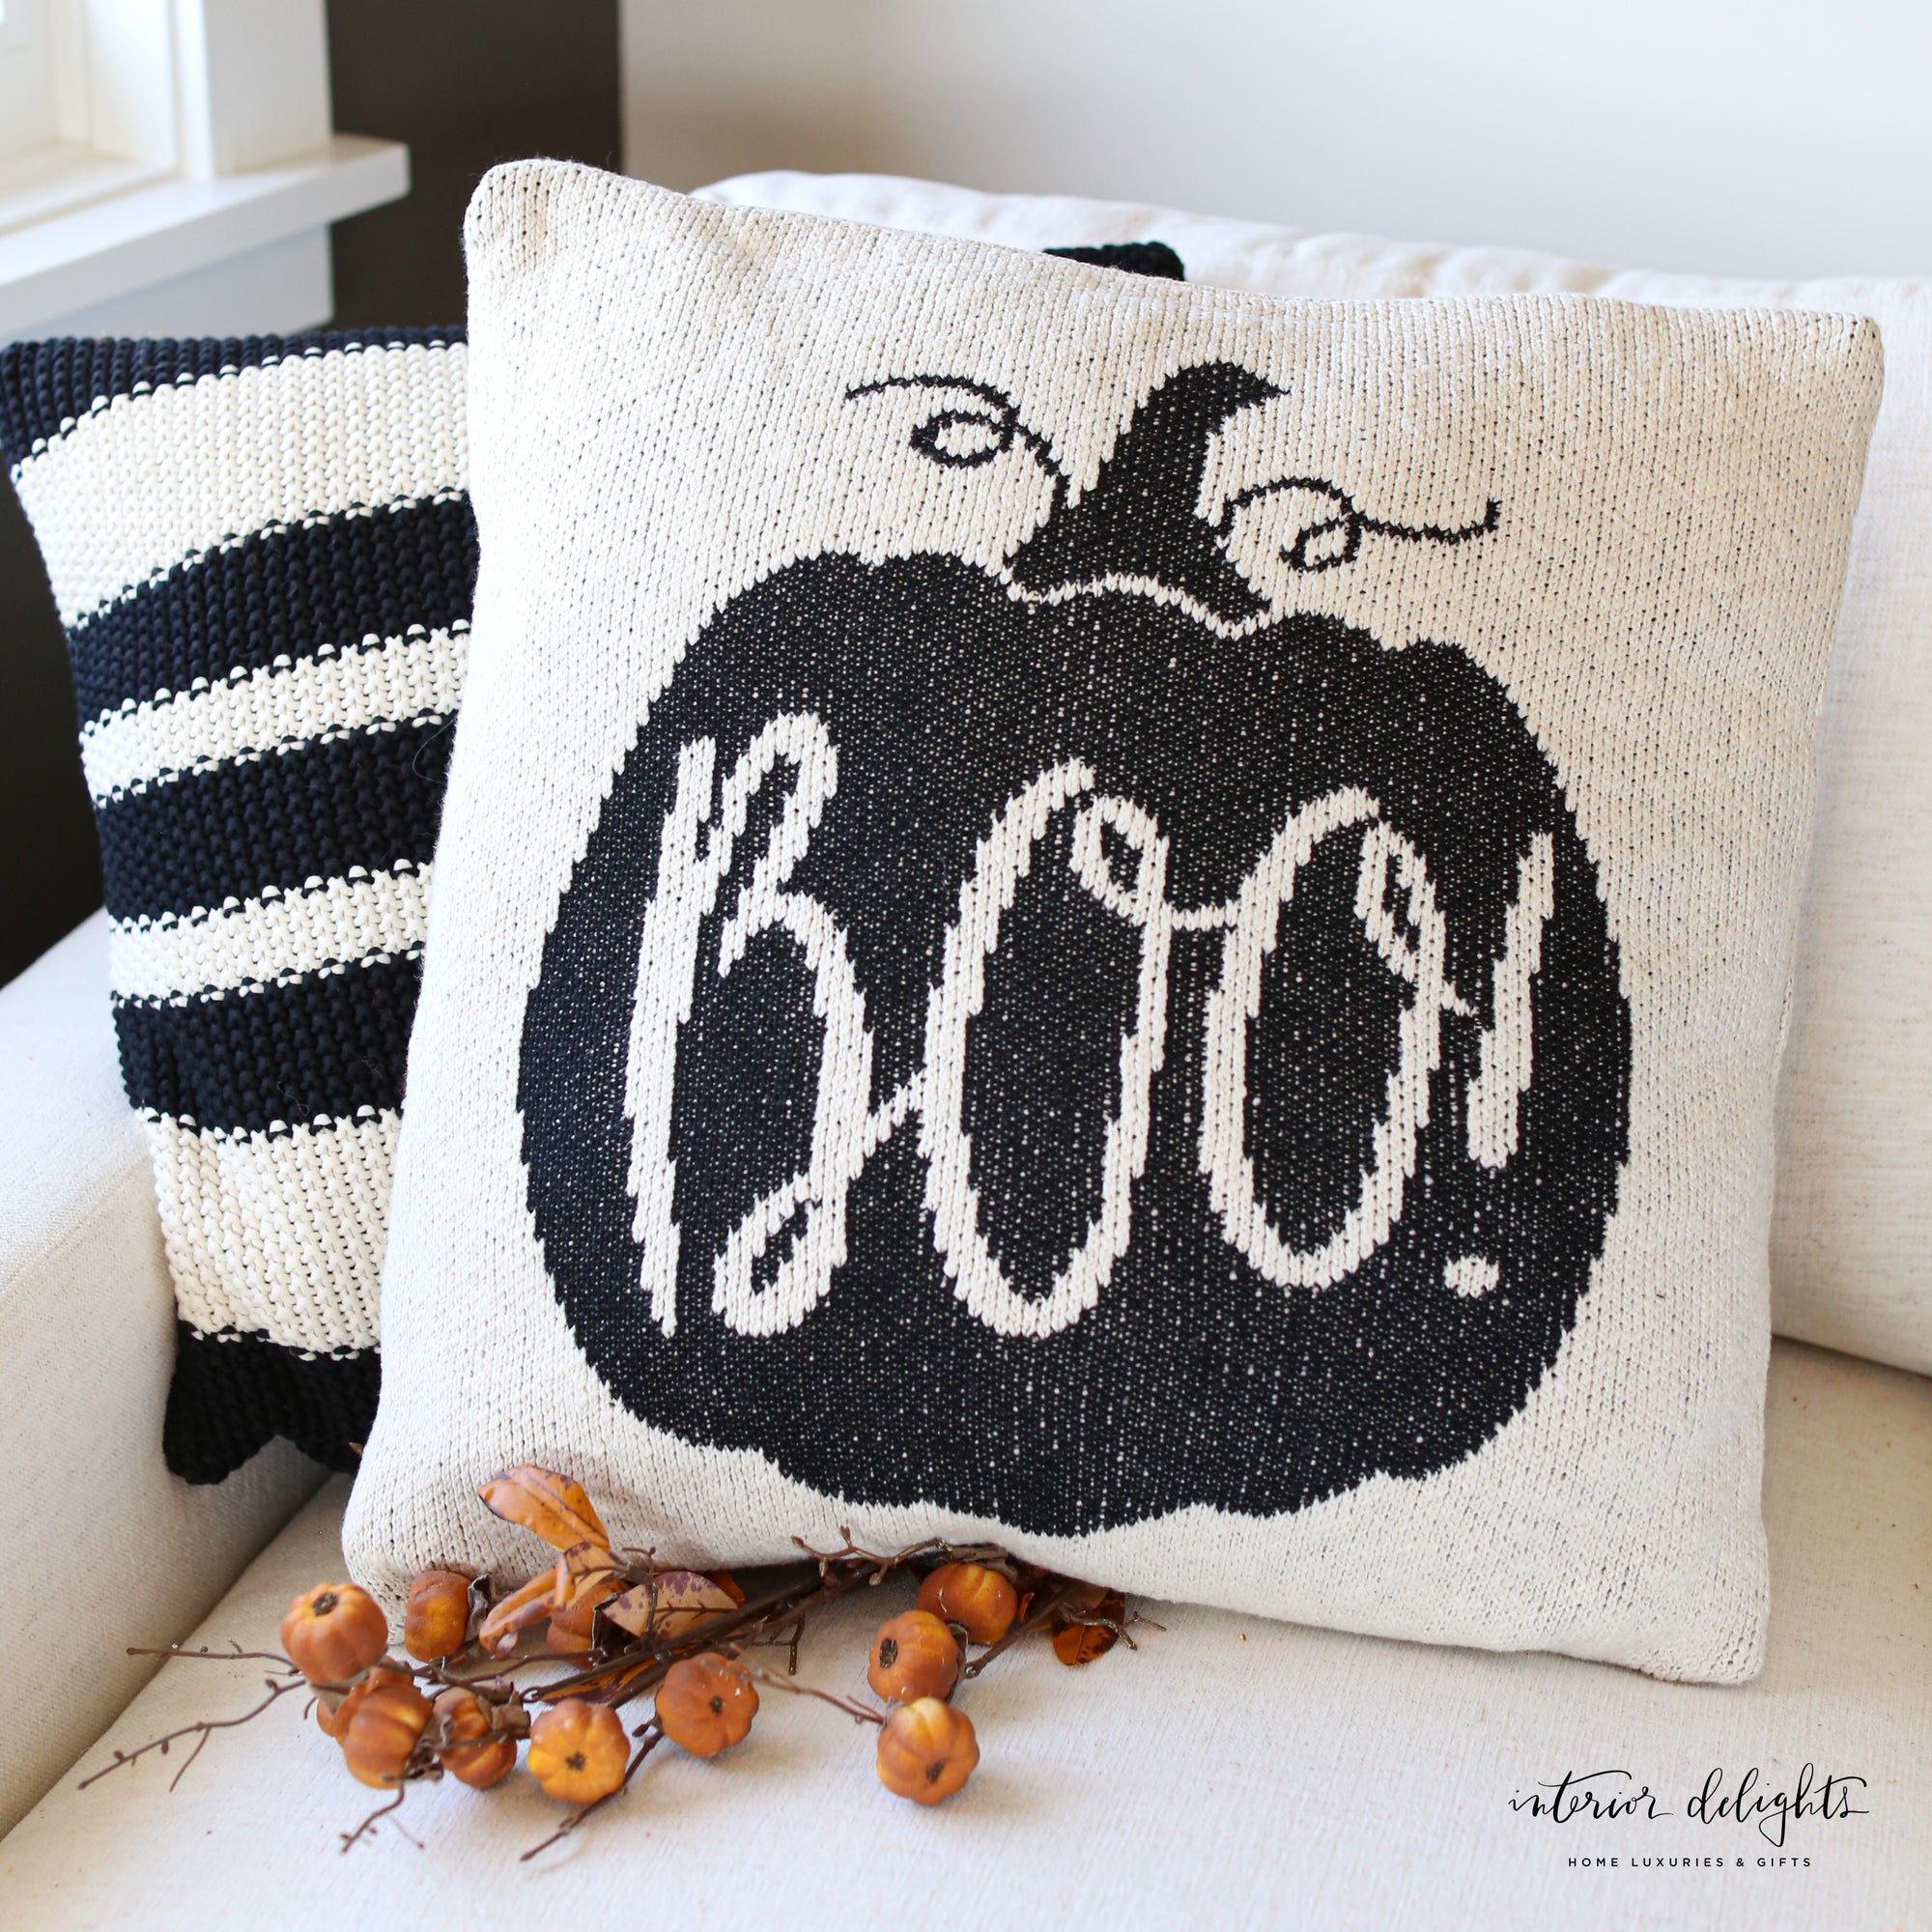 ON SALE: Cotton Cream and Black Boo Pillow